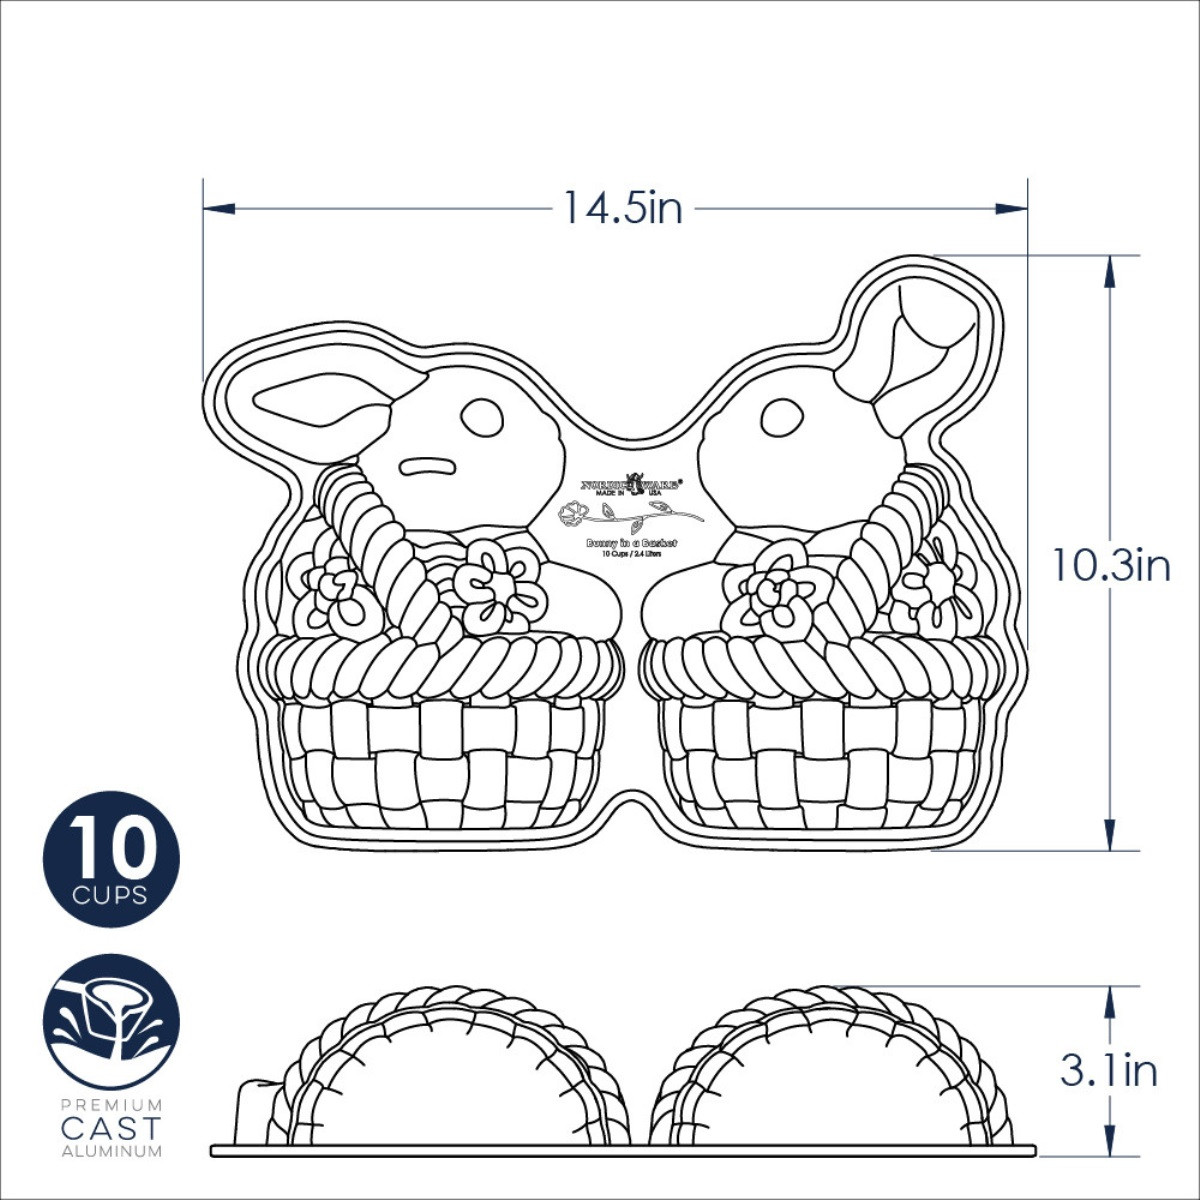 Nordic Ware Easter Bunny in Basket Baking mould